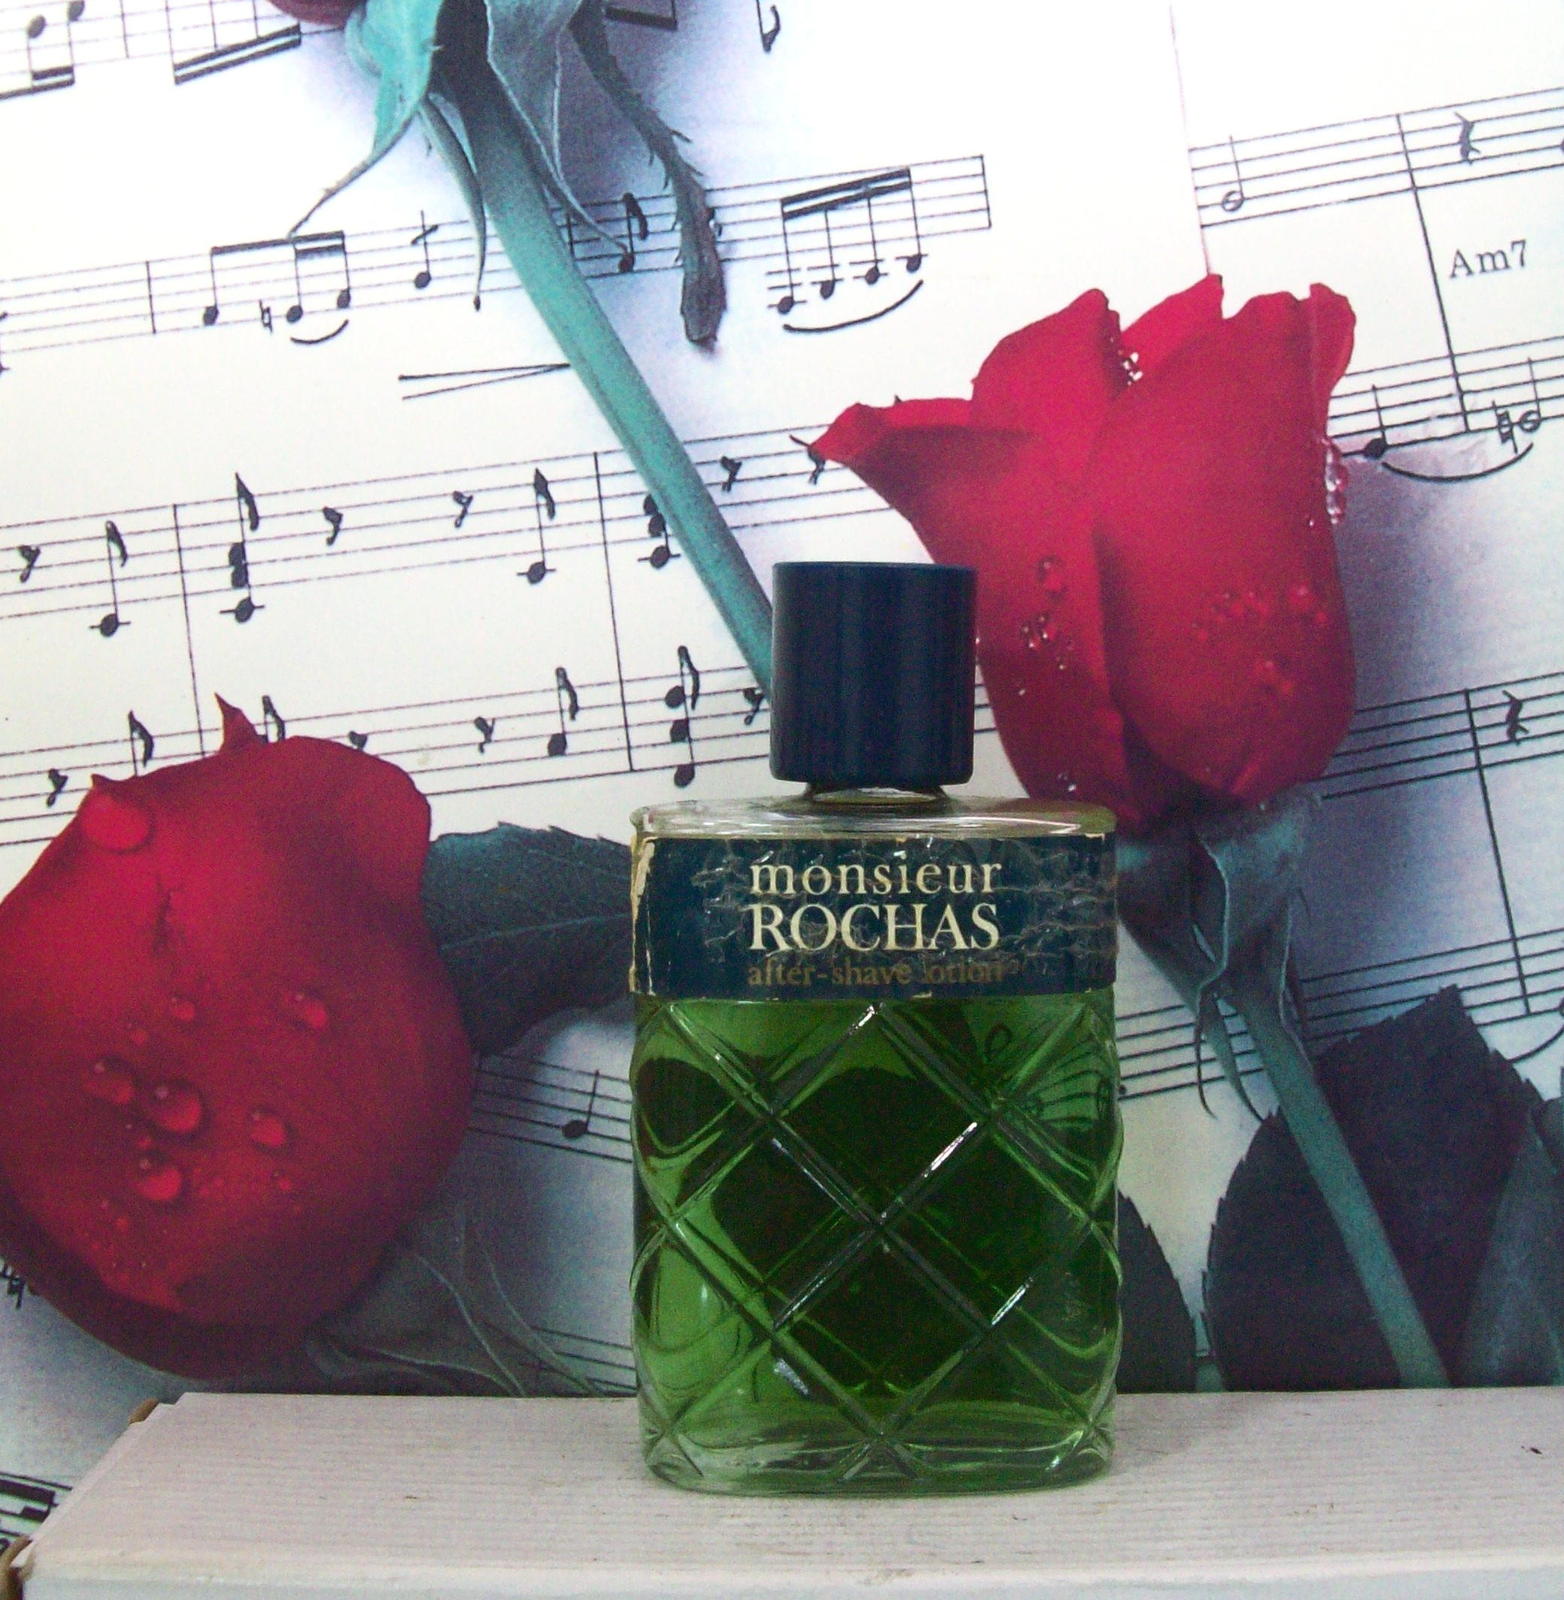 Monsieur Rochas After Shave Lotion 4.0 FL. OZ. 85% Full. Unboxed. - $119.99